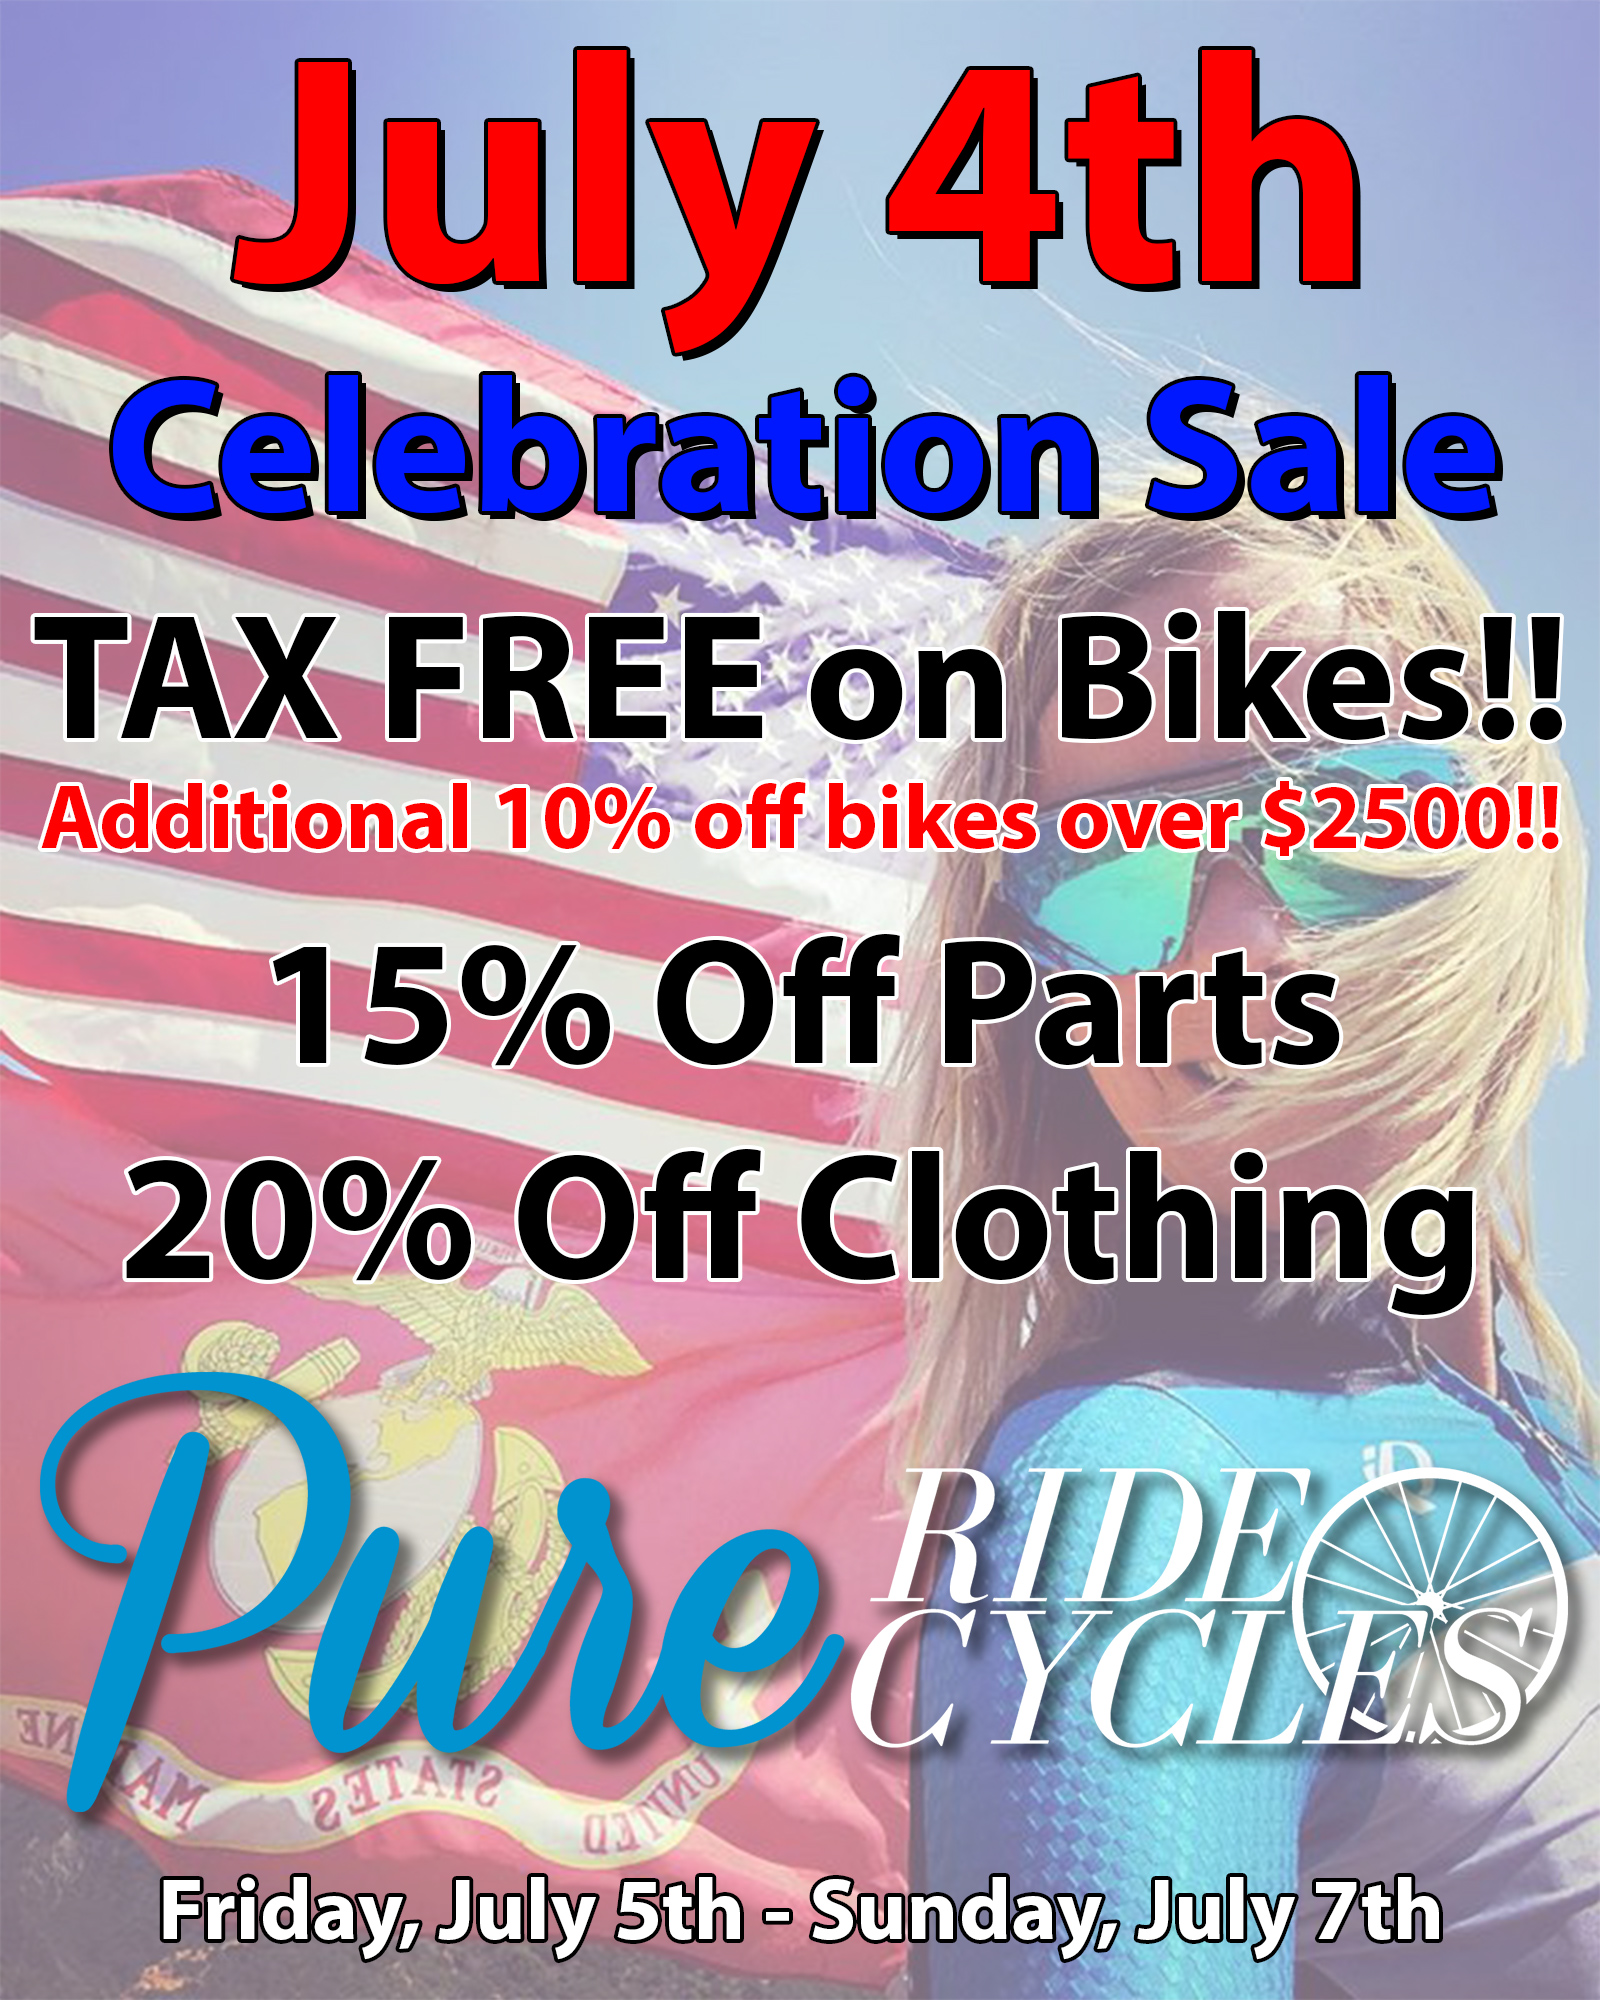 Pure Ride Cycles